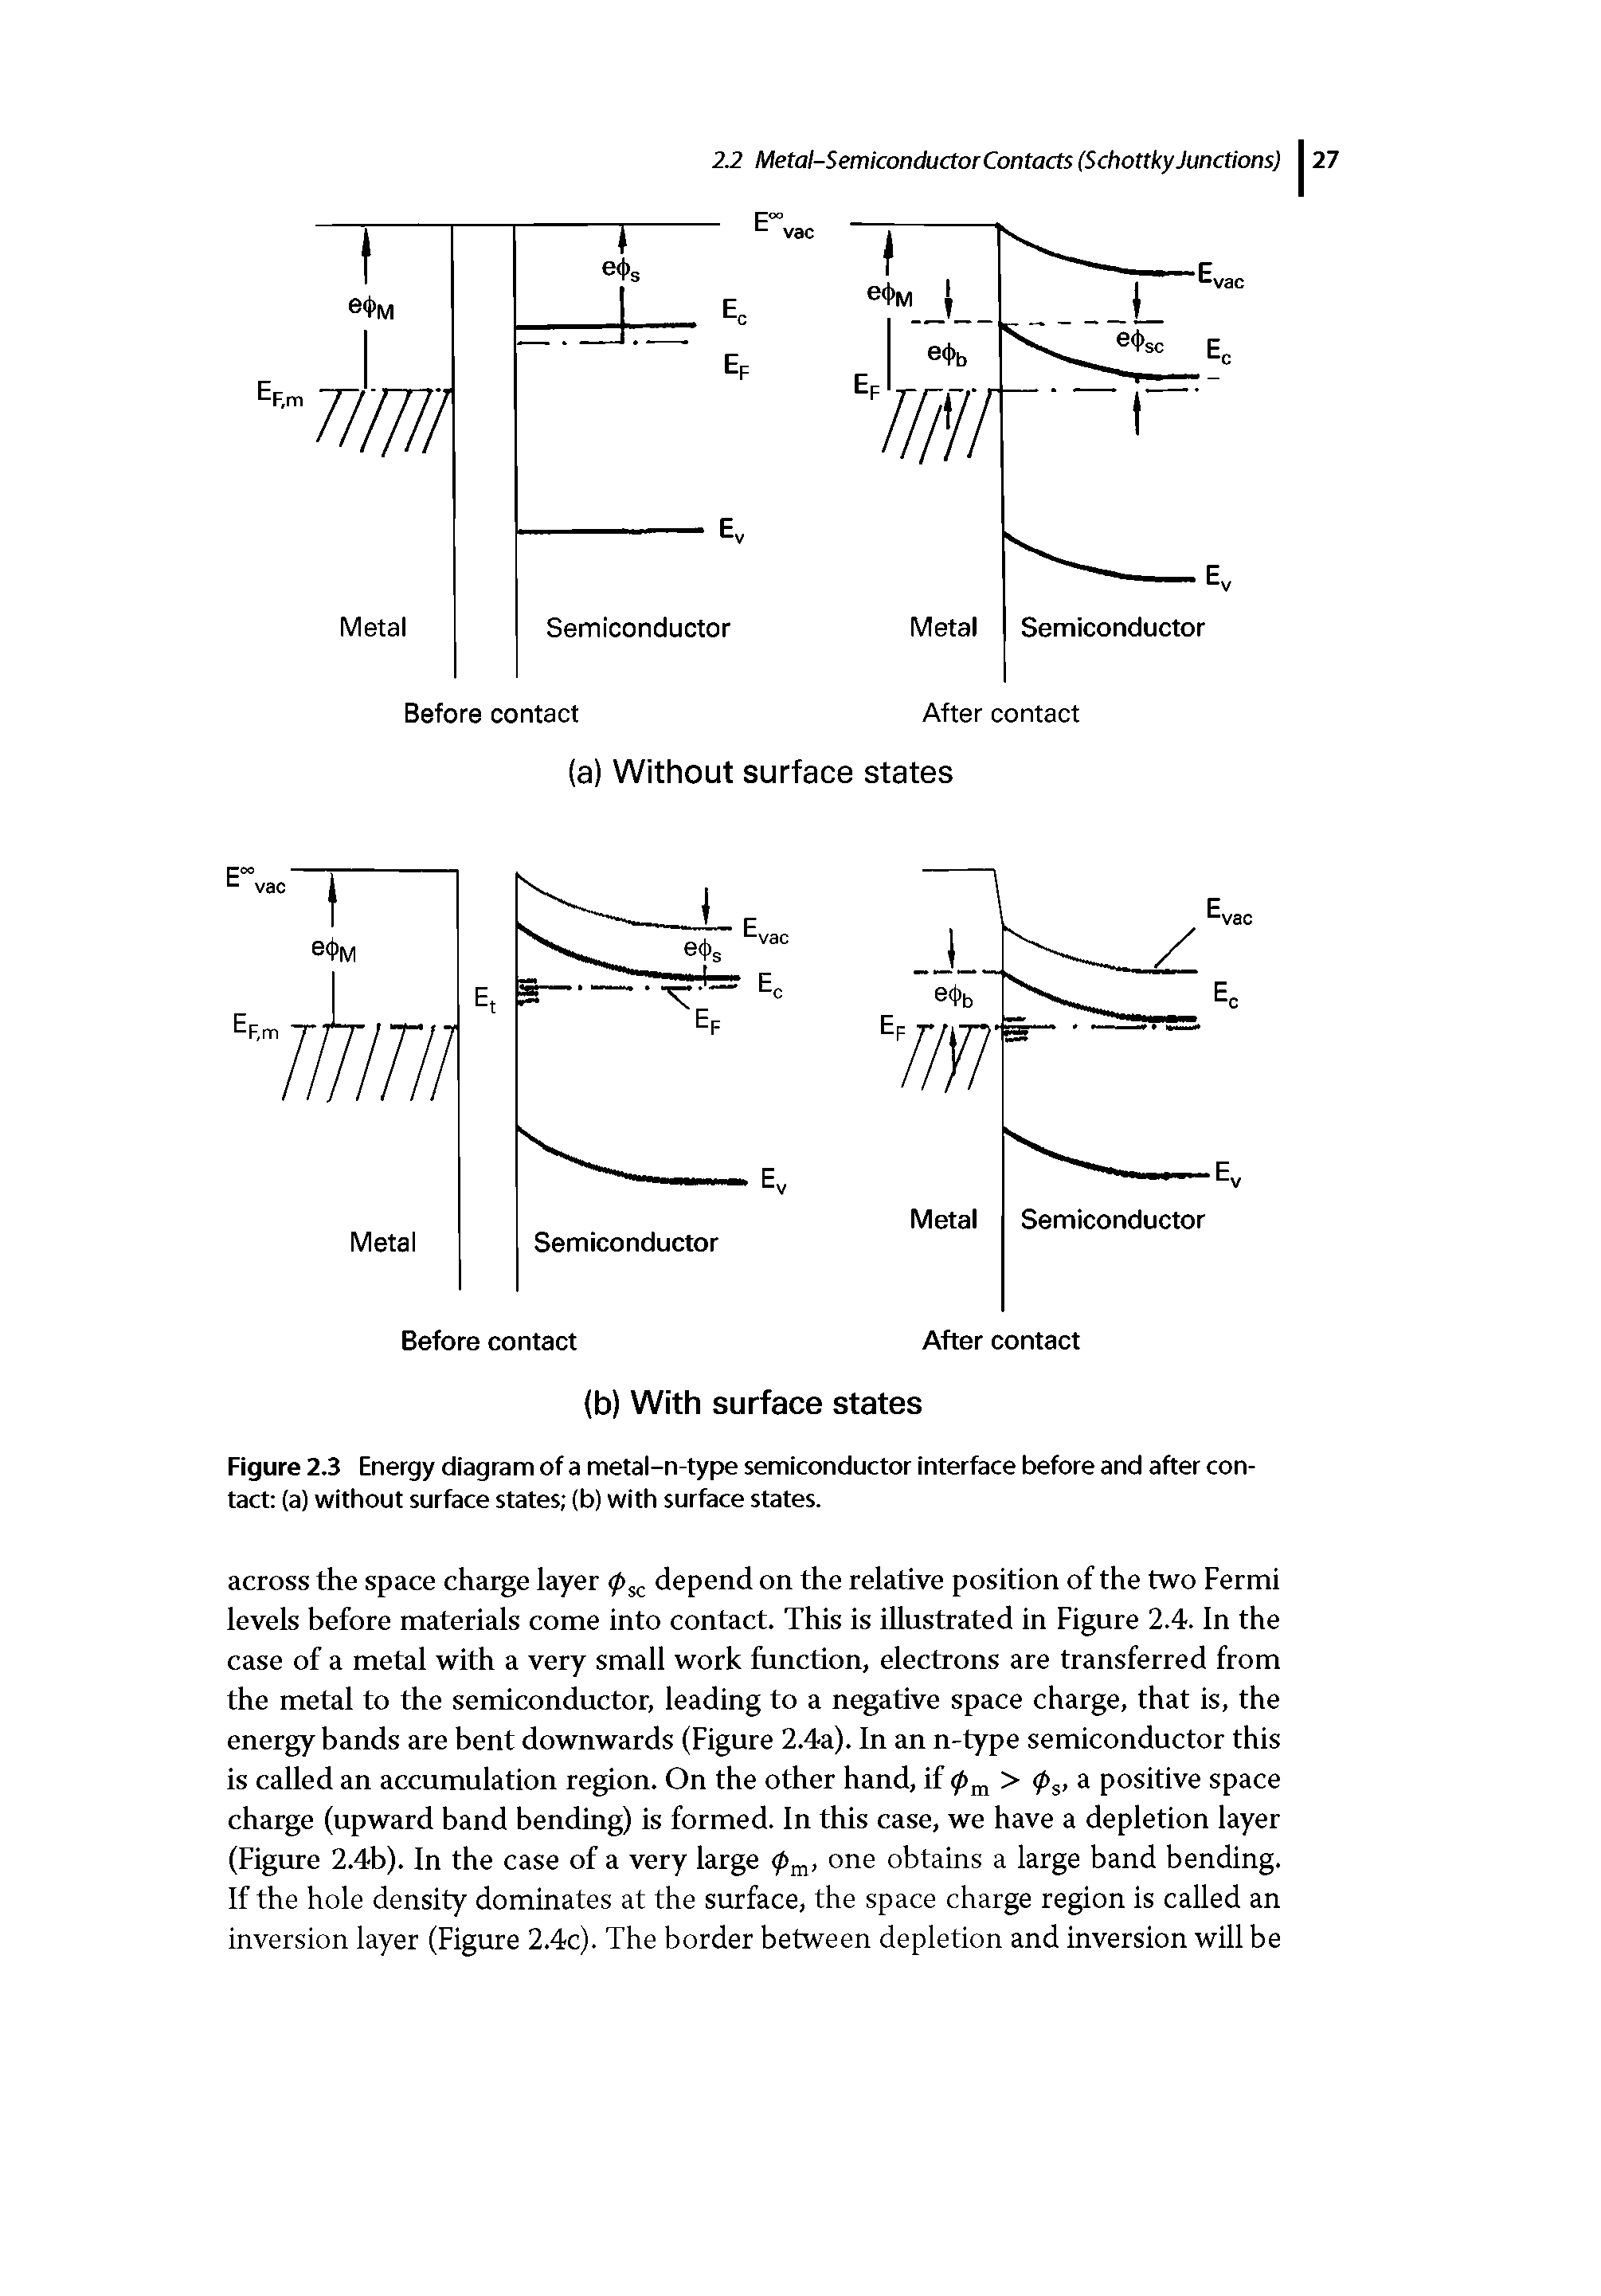 Figure 2.3 Energy diagram of a metal-n-type semiconductor interface before and after contact (a) without surface states (b) with surface states.